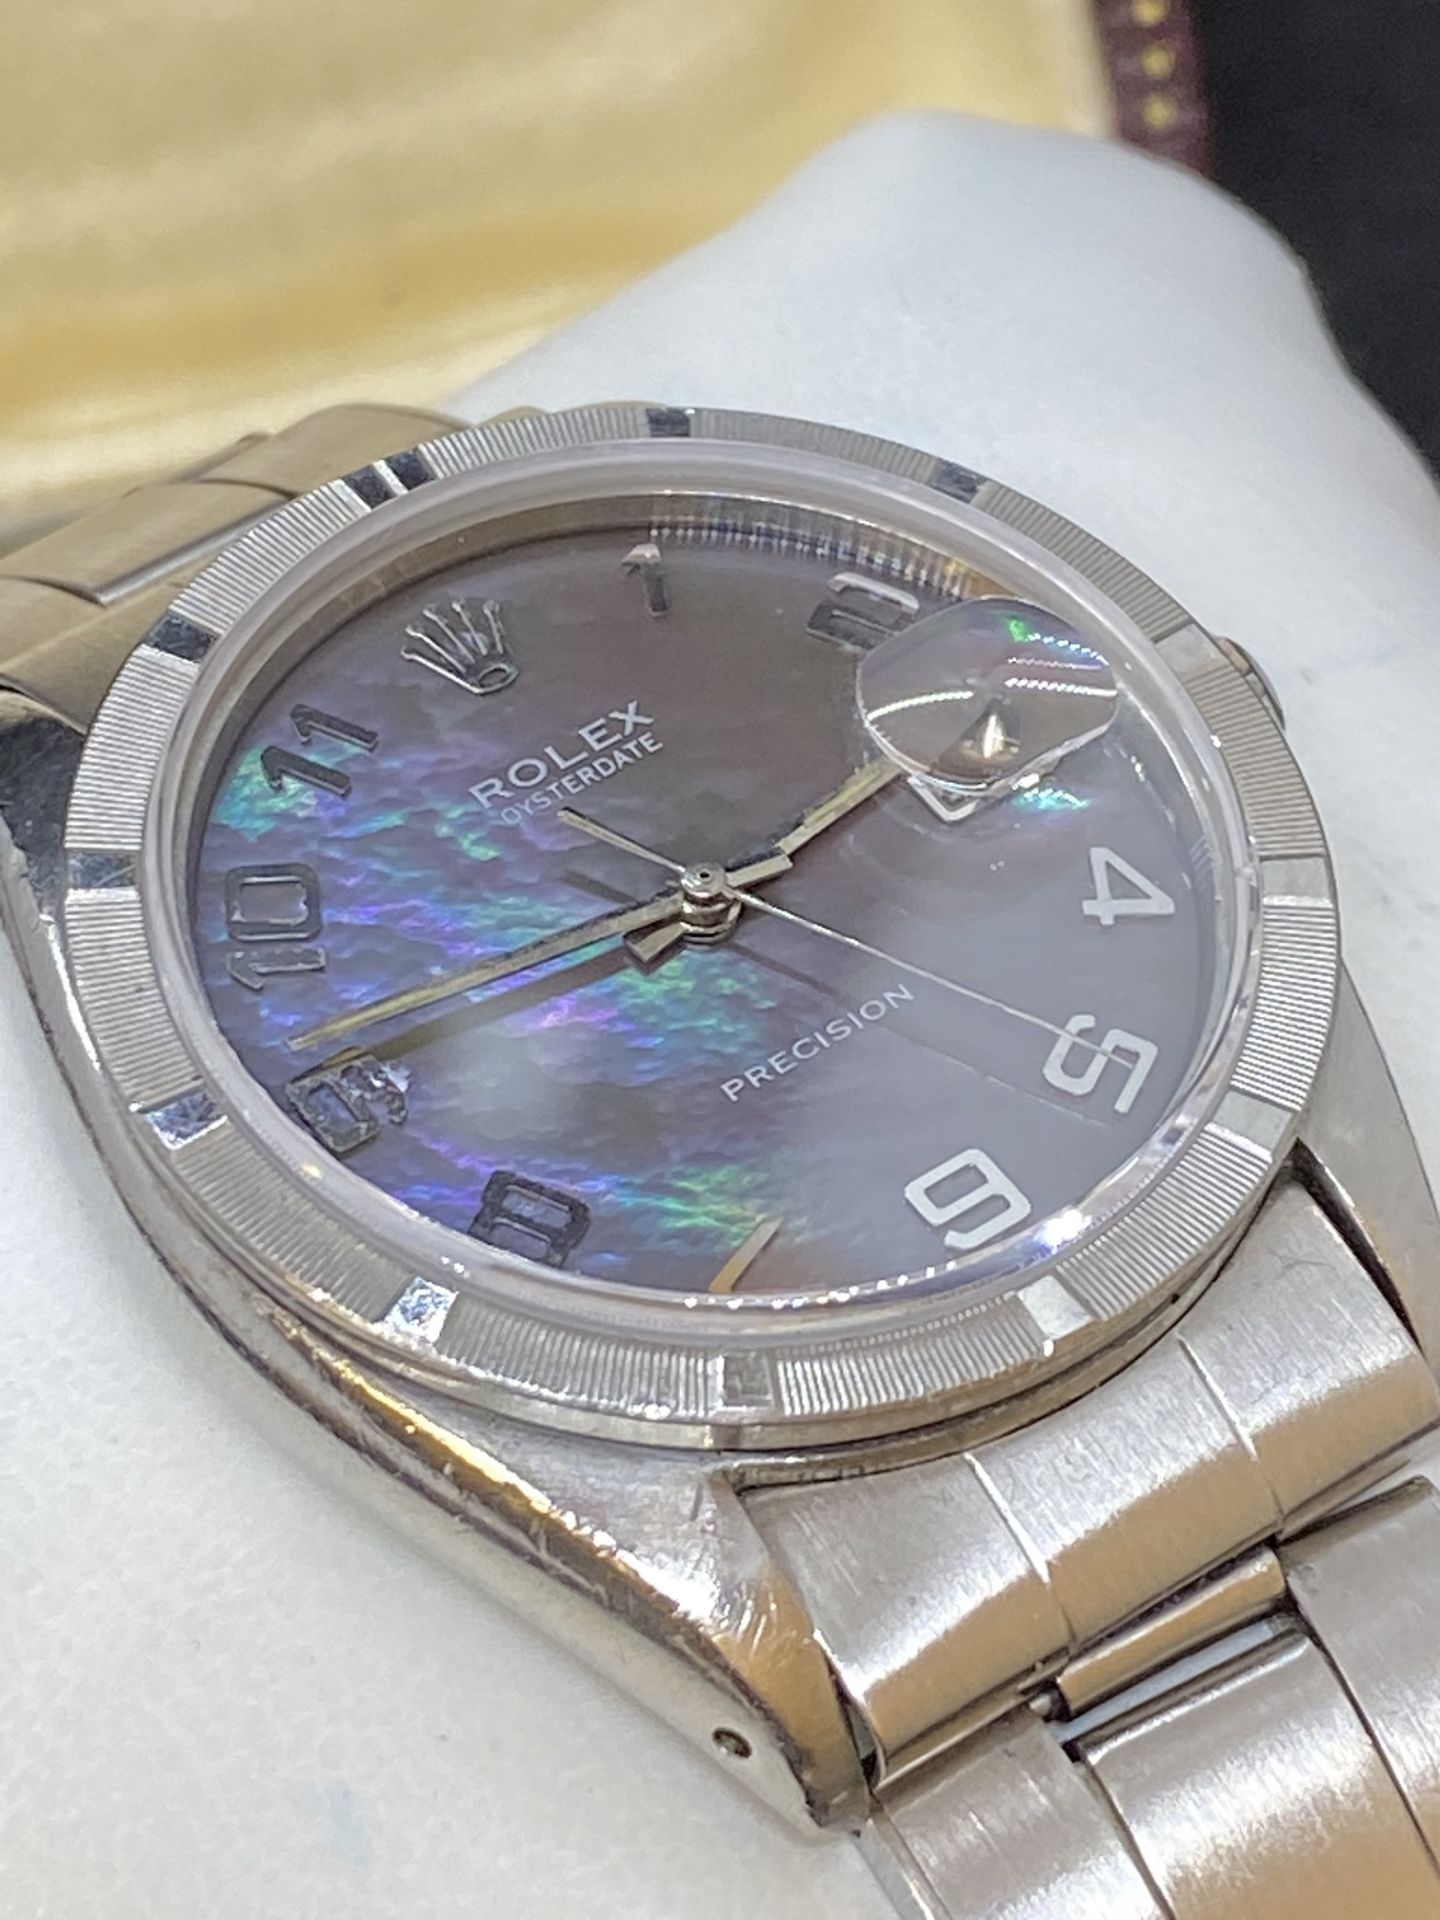 ROLEX OYSTERDATE PRECISION WATCH - Image 7 of 15